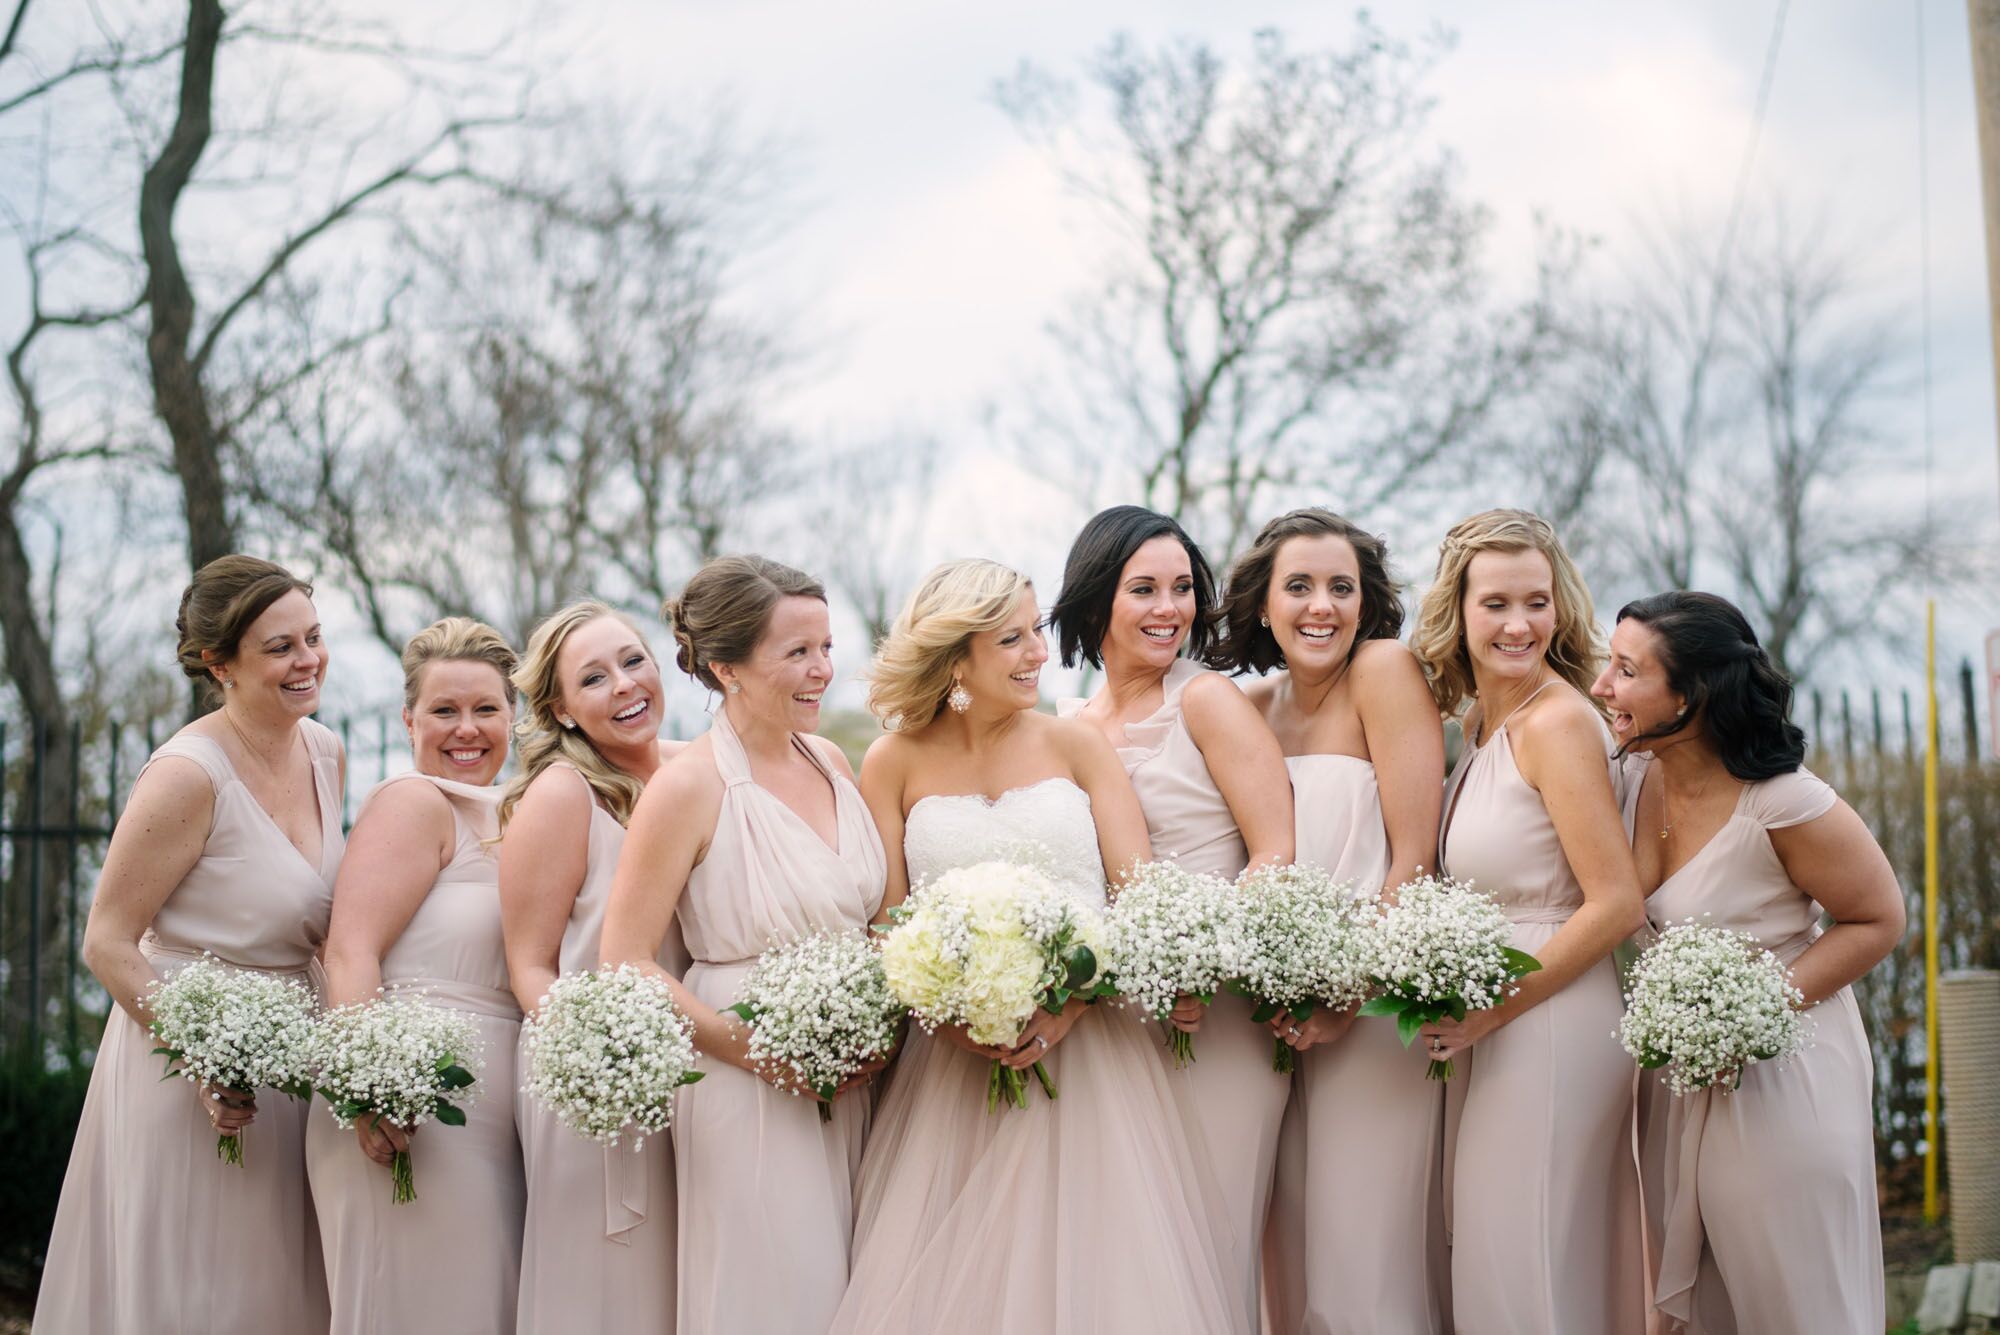 Bridal Party in Blush Dresses